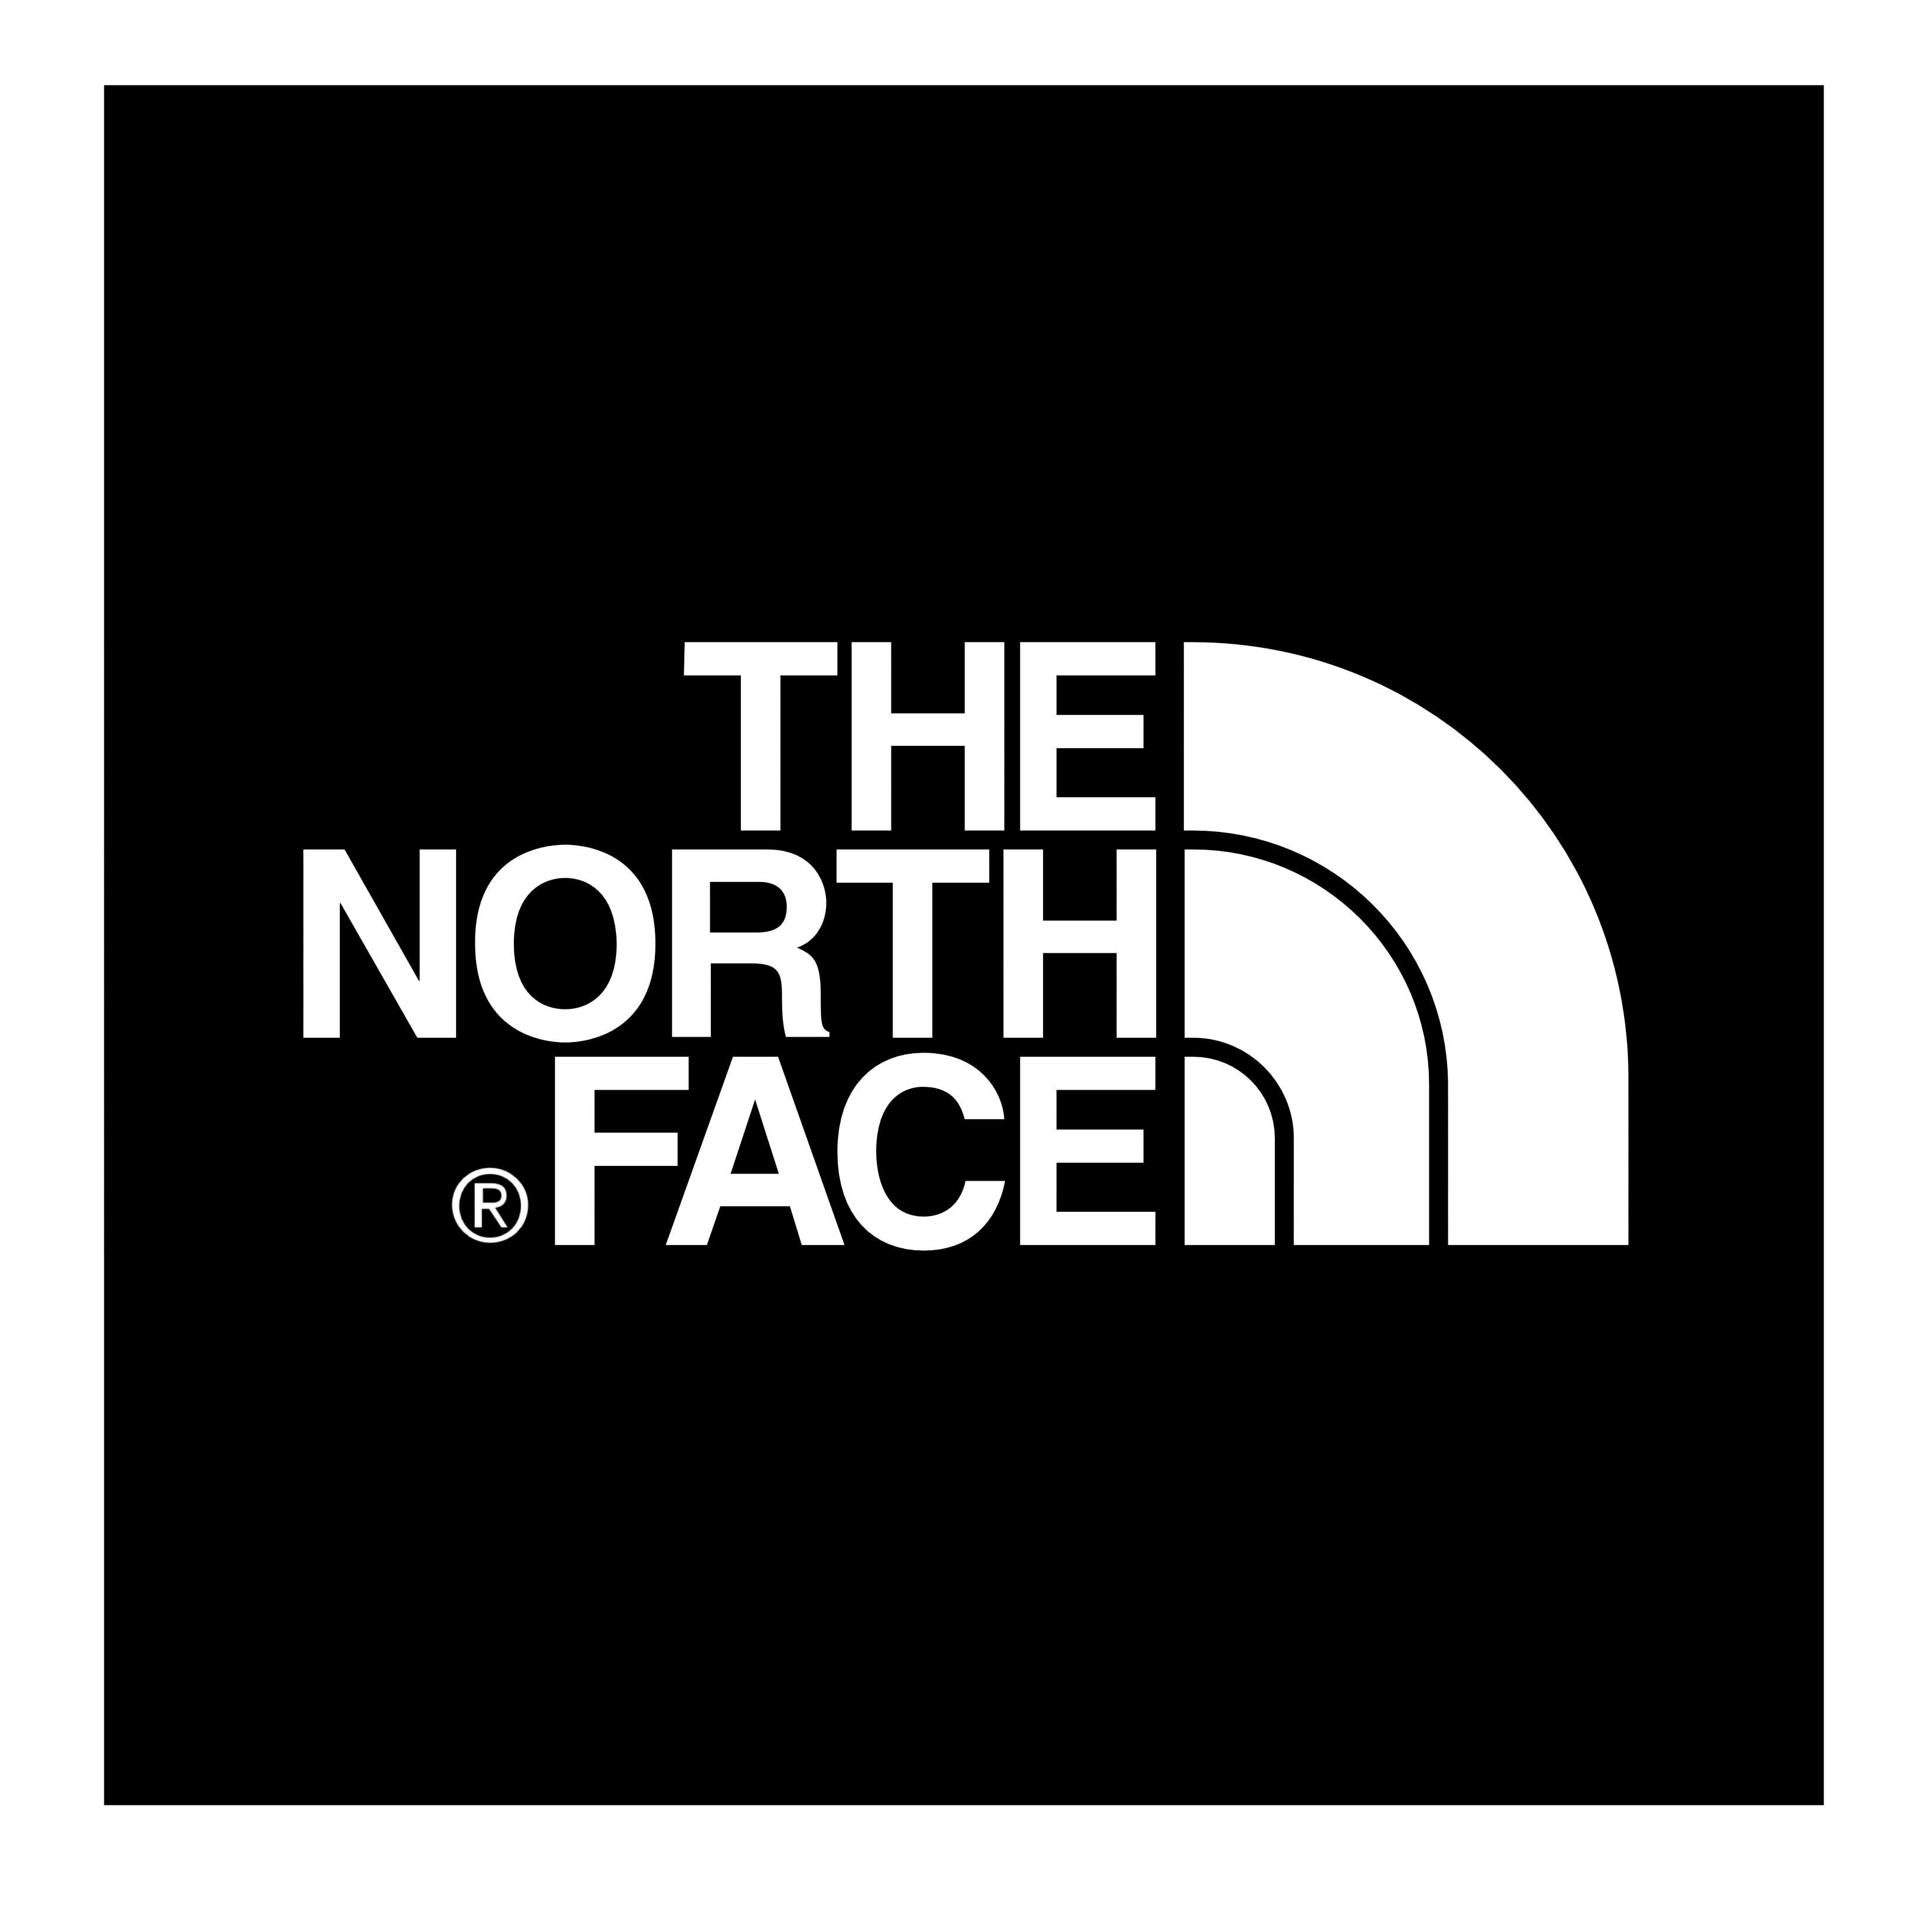 The North Face logo, logotype